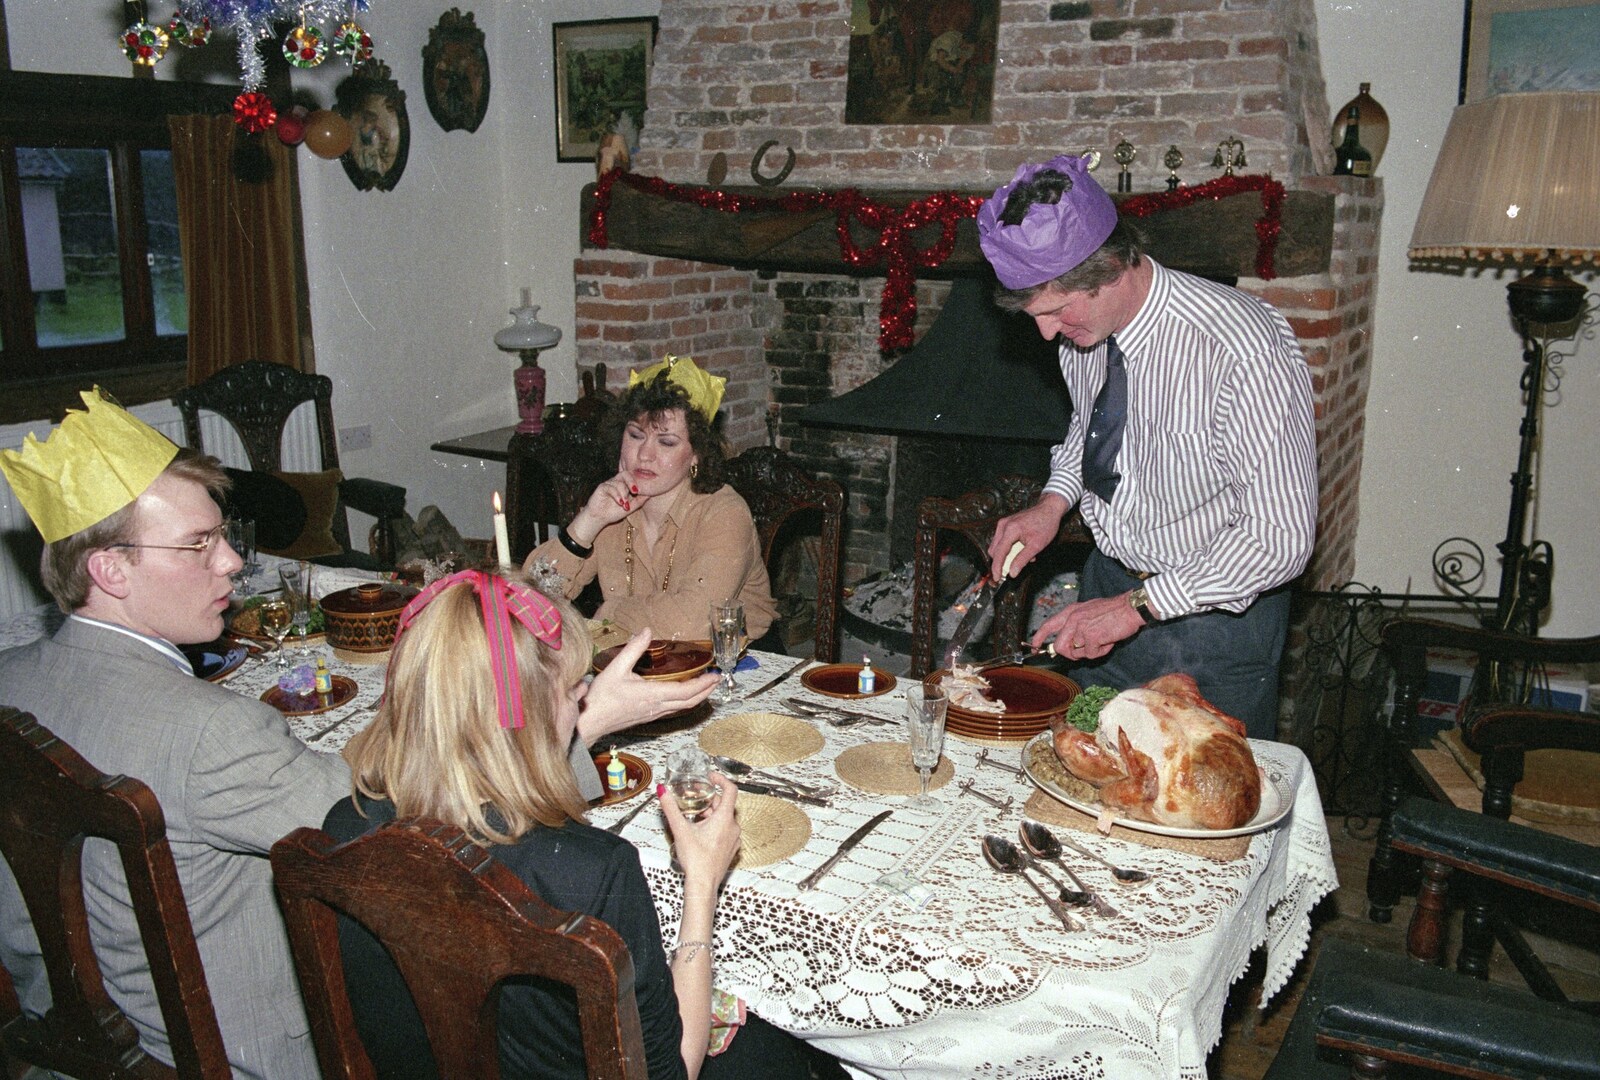 Christmas dinner occurs from Christmas Dinner with Geoff and Brenda, Stuston, Suffolk - 25th December 1990